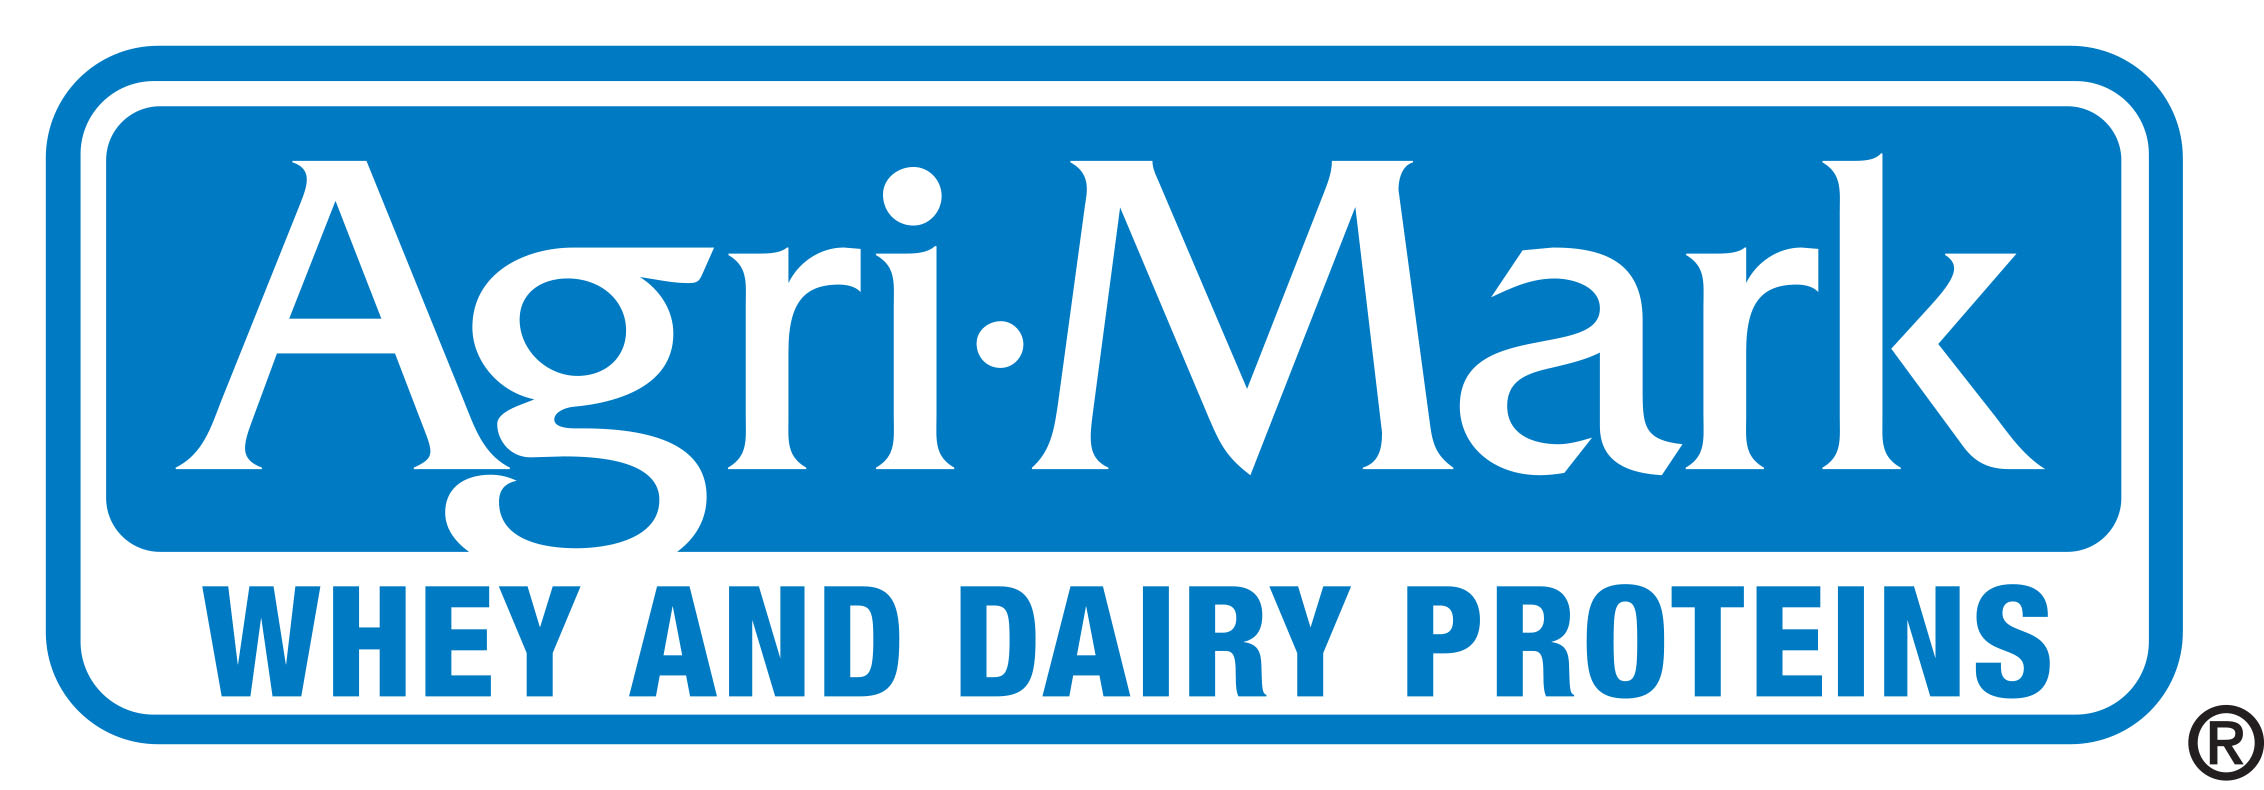 Agri-Mark Whey and Dairy Proteins